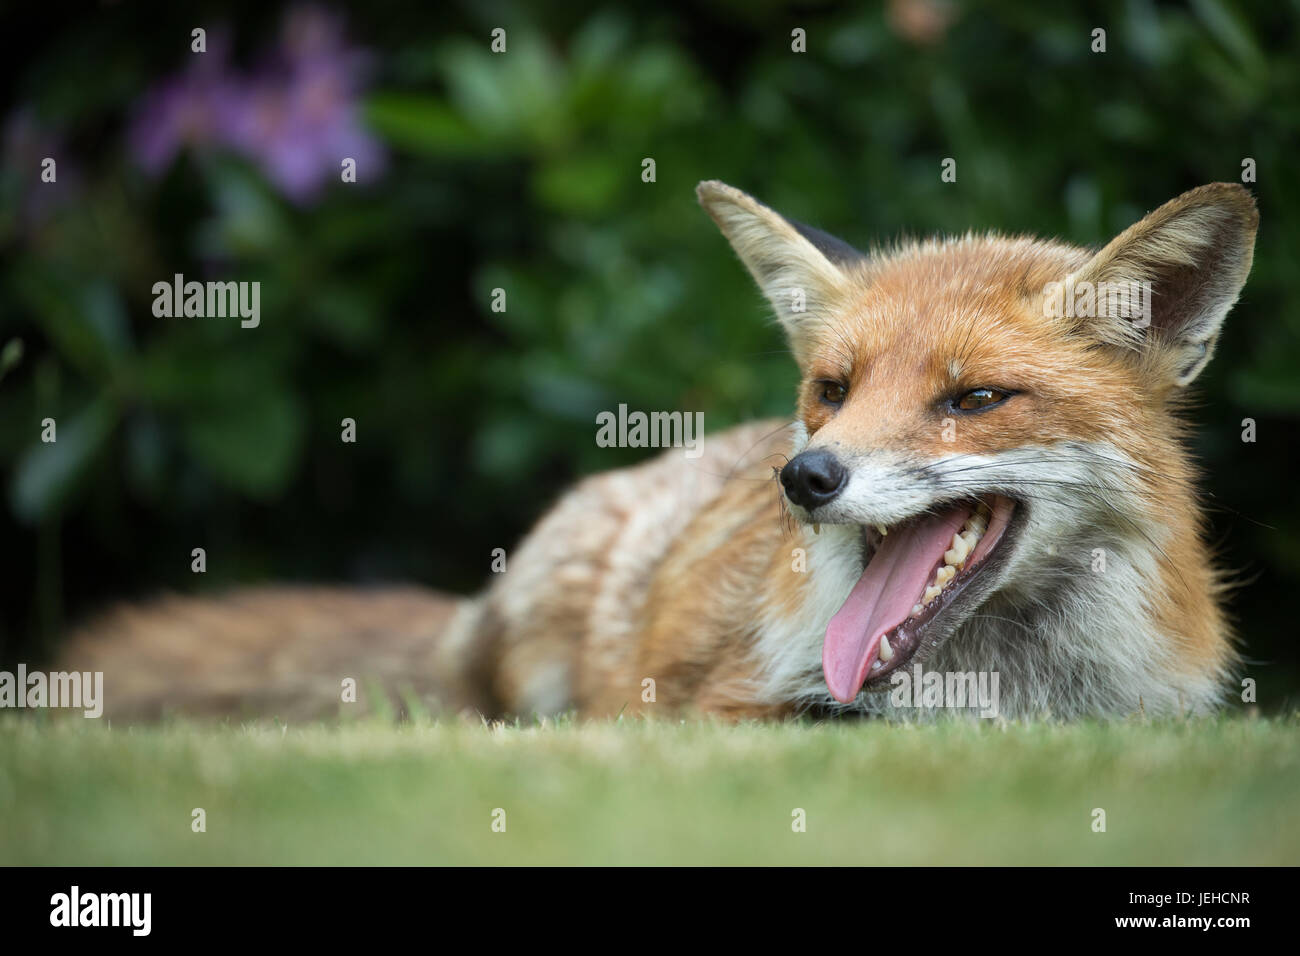 Fox trying to keep cool during a British summer heatwave Stock Photo